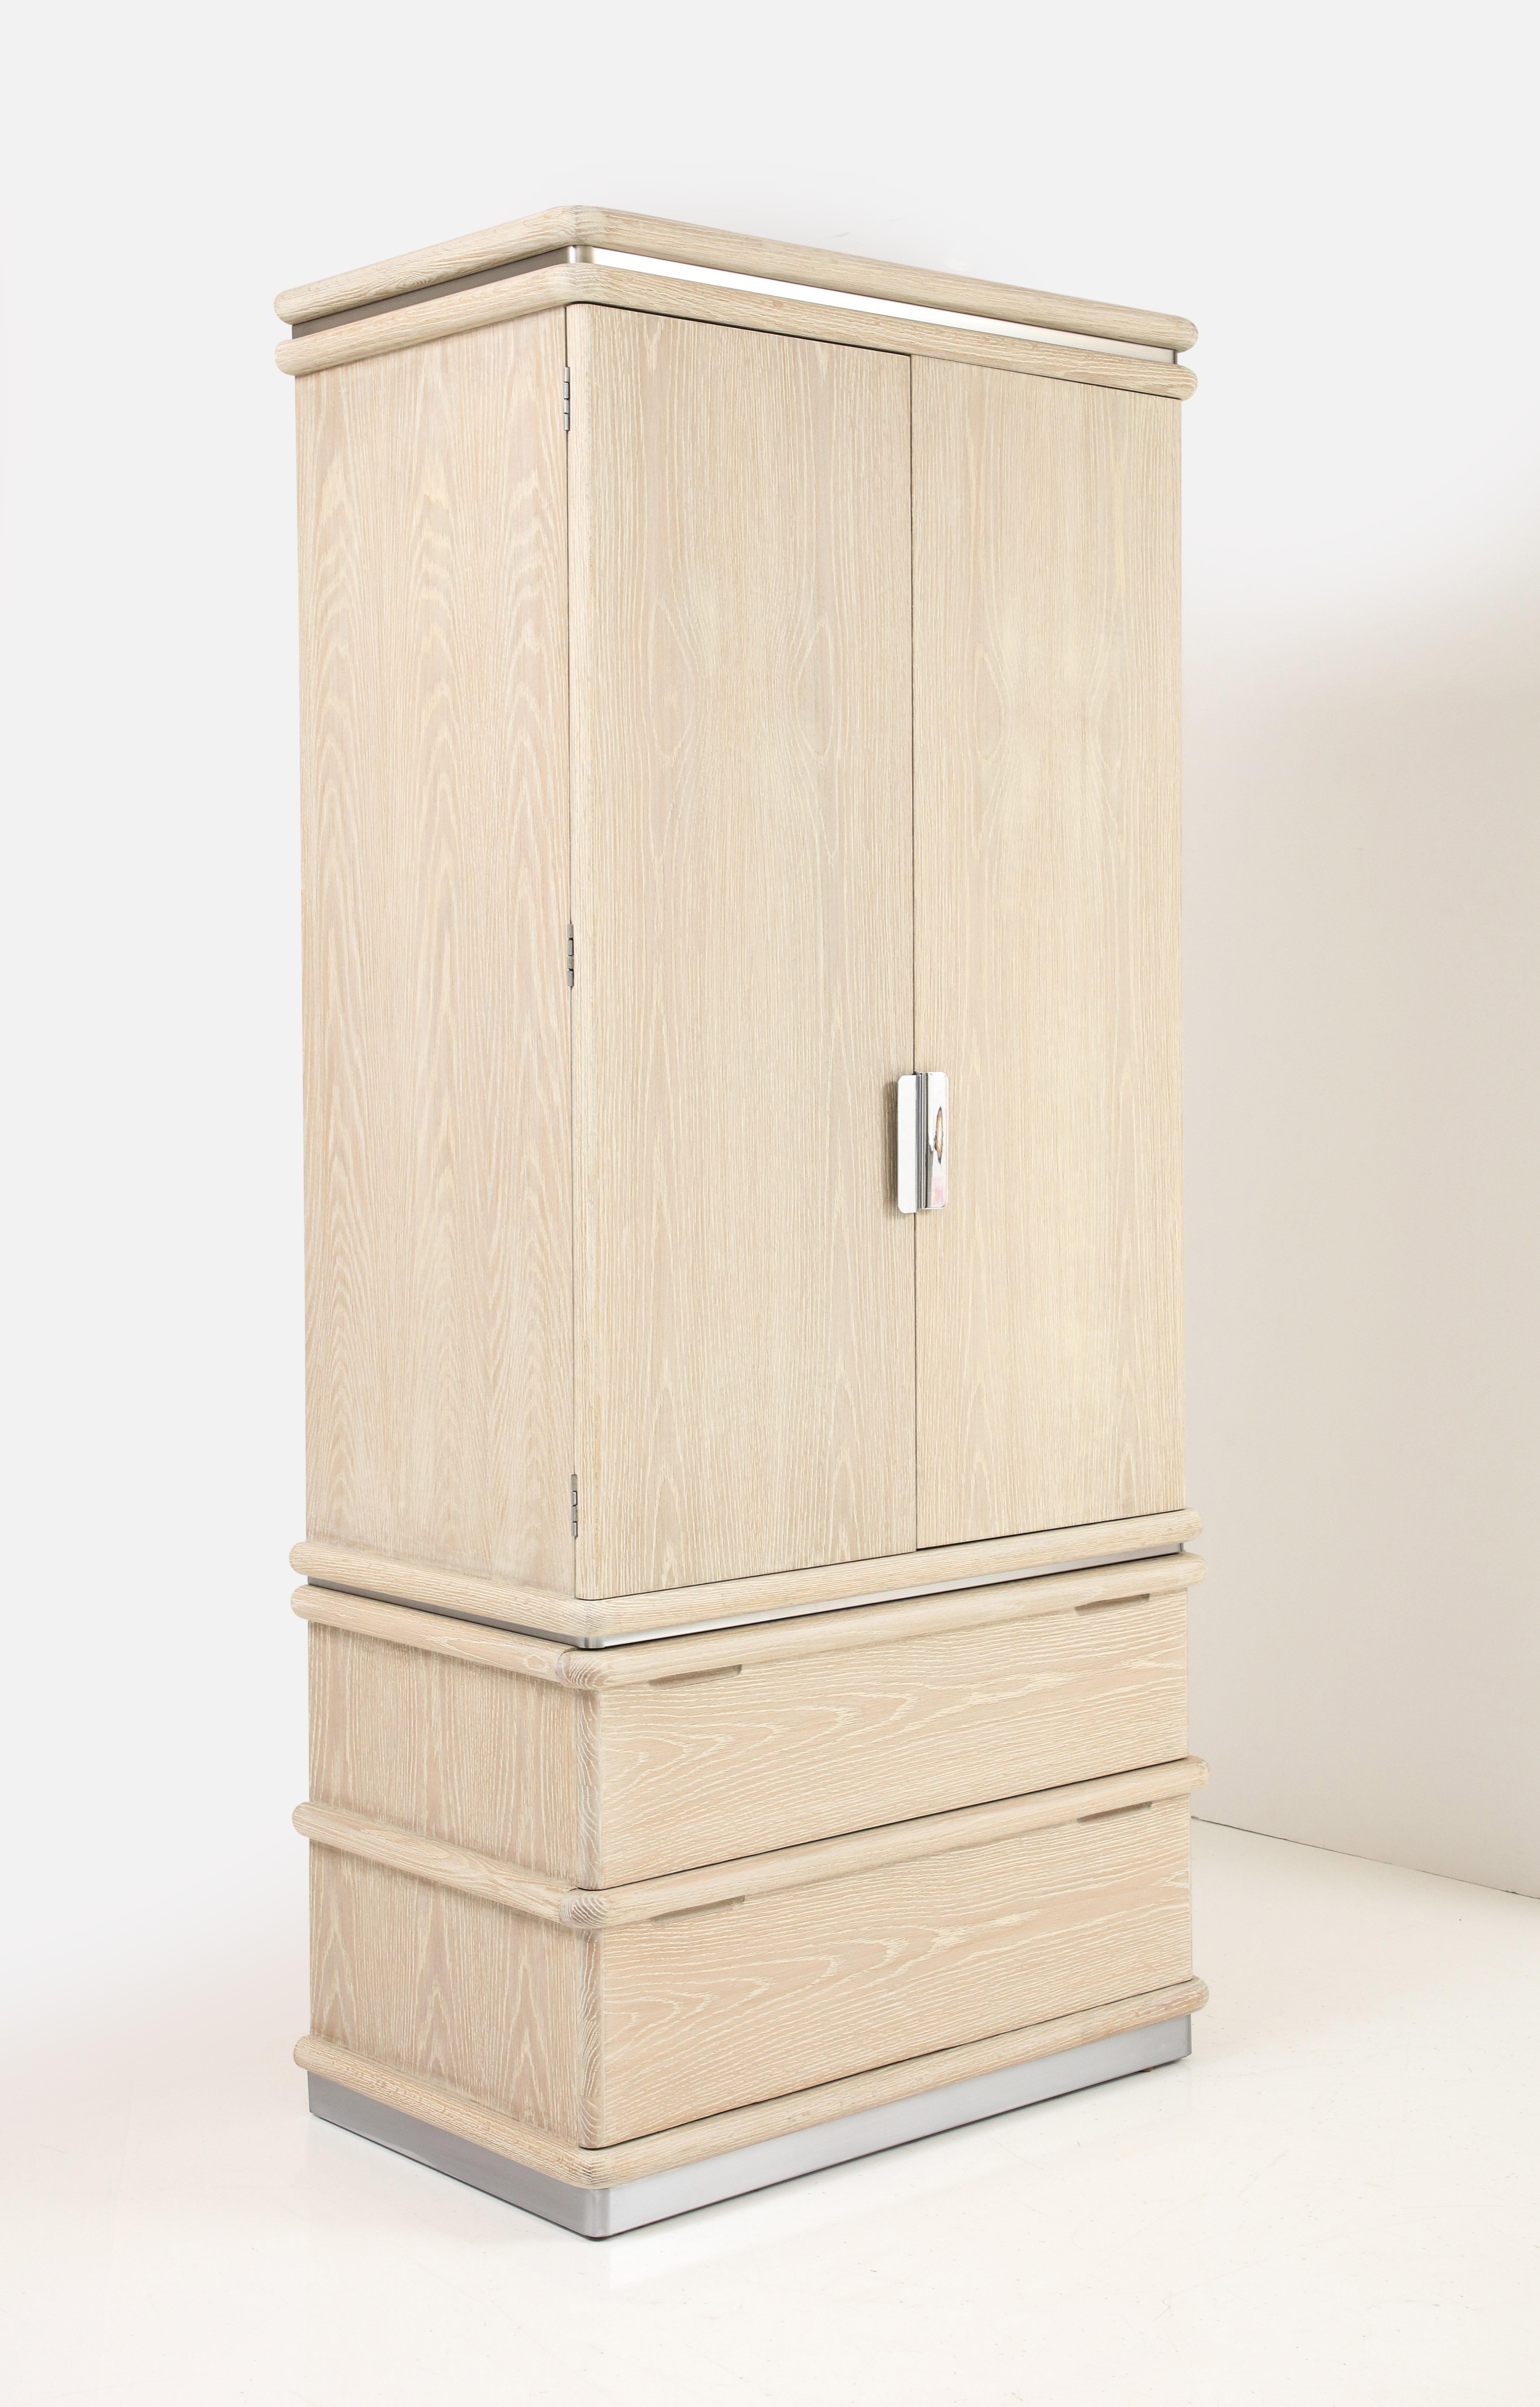 Custom Finished, Cerused Oak wardrobe by Jay Spectre for Century Furniture. Wardrobe features 2 large bottom drawers and doors open to reveal a series of cubicles and smaller drawers. Recently mint restored in a sand colored cerused finish. Signed.